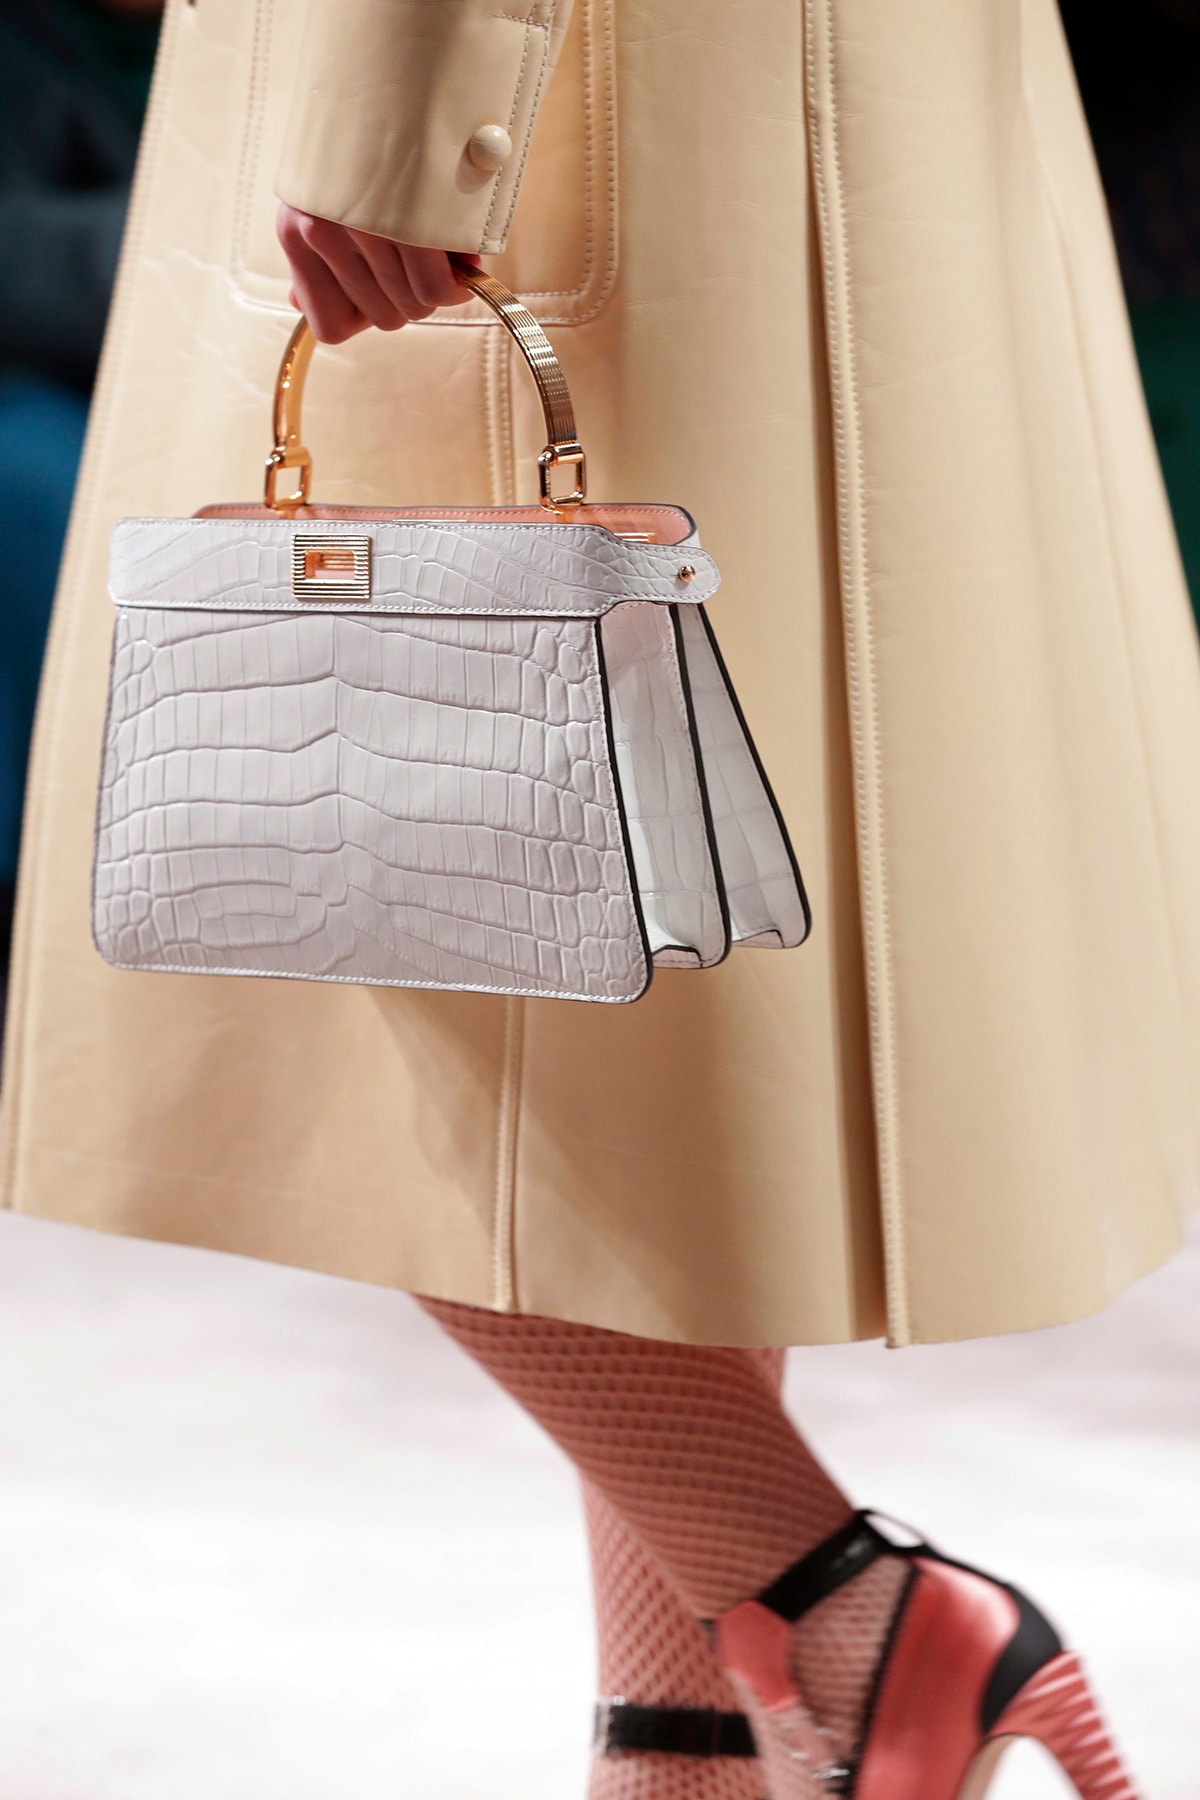 Fendi Fall/Winter 2020 Collection Bags Accessories Top Handle Croc Embossed White